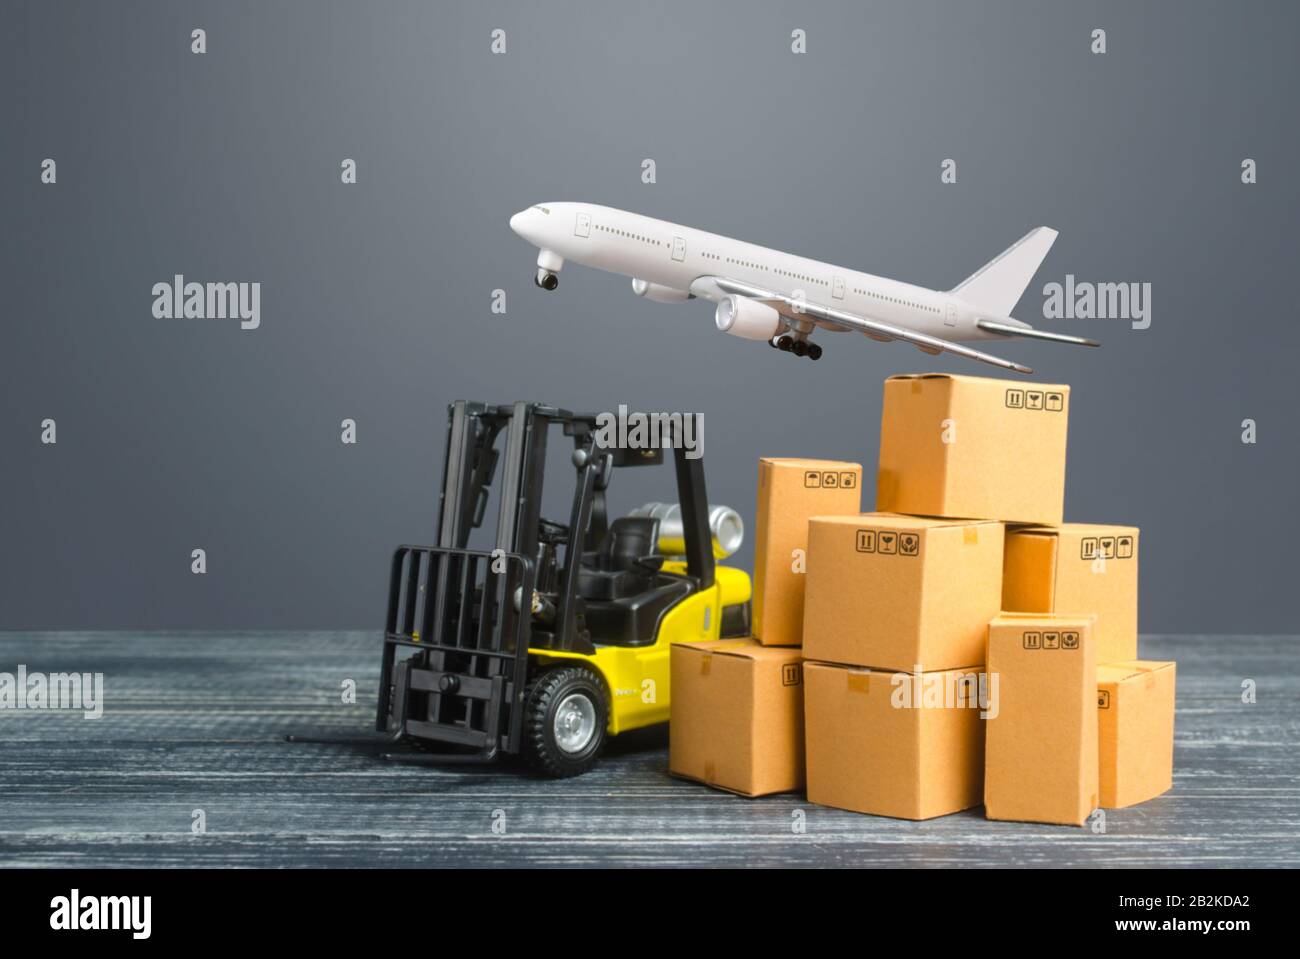 Yellow Forklift truck and cardboard boxes and freight plane. Production, transport, cargo storage. Freight shipping. retail. Transportation logistics Stock Photo